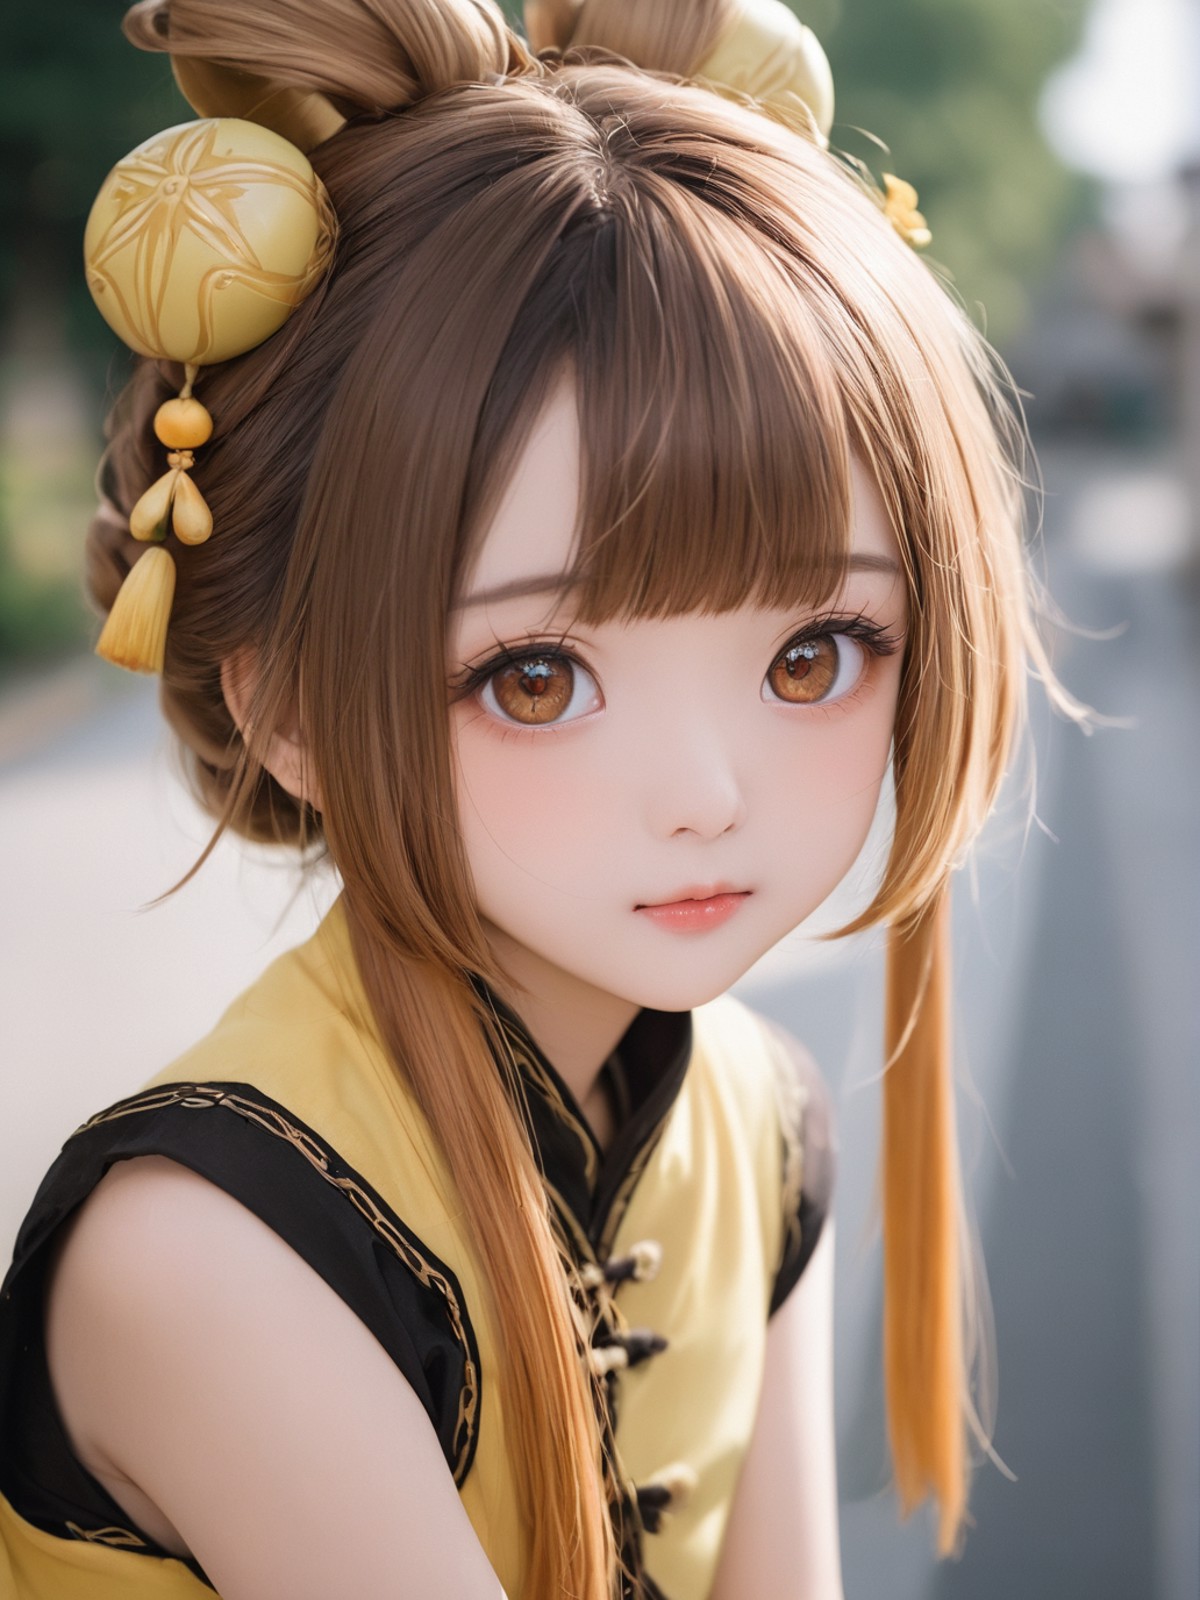 YAOYAO\(genshin impact\),real portrait photography,
35mm photograph,RAW photography,professional grade,18 year old cute ch...